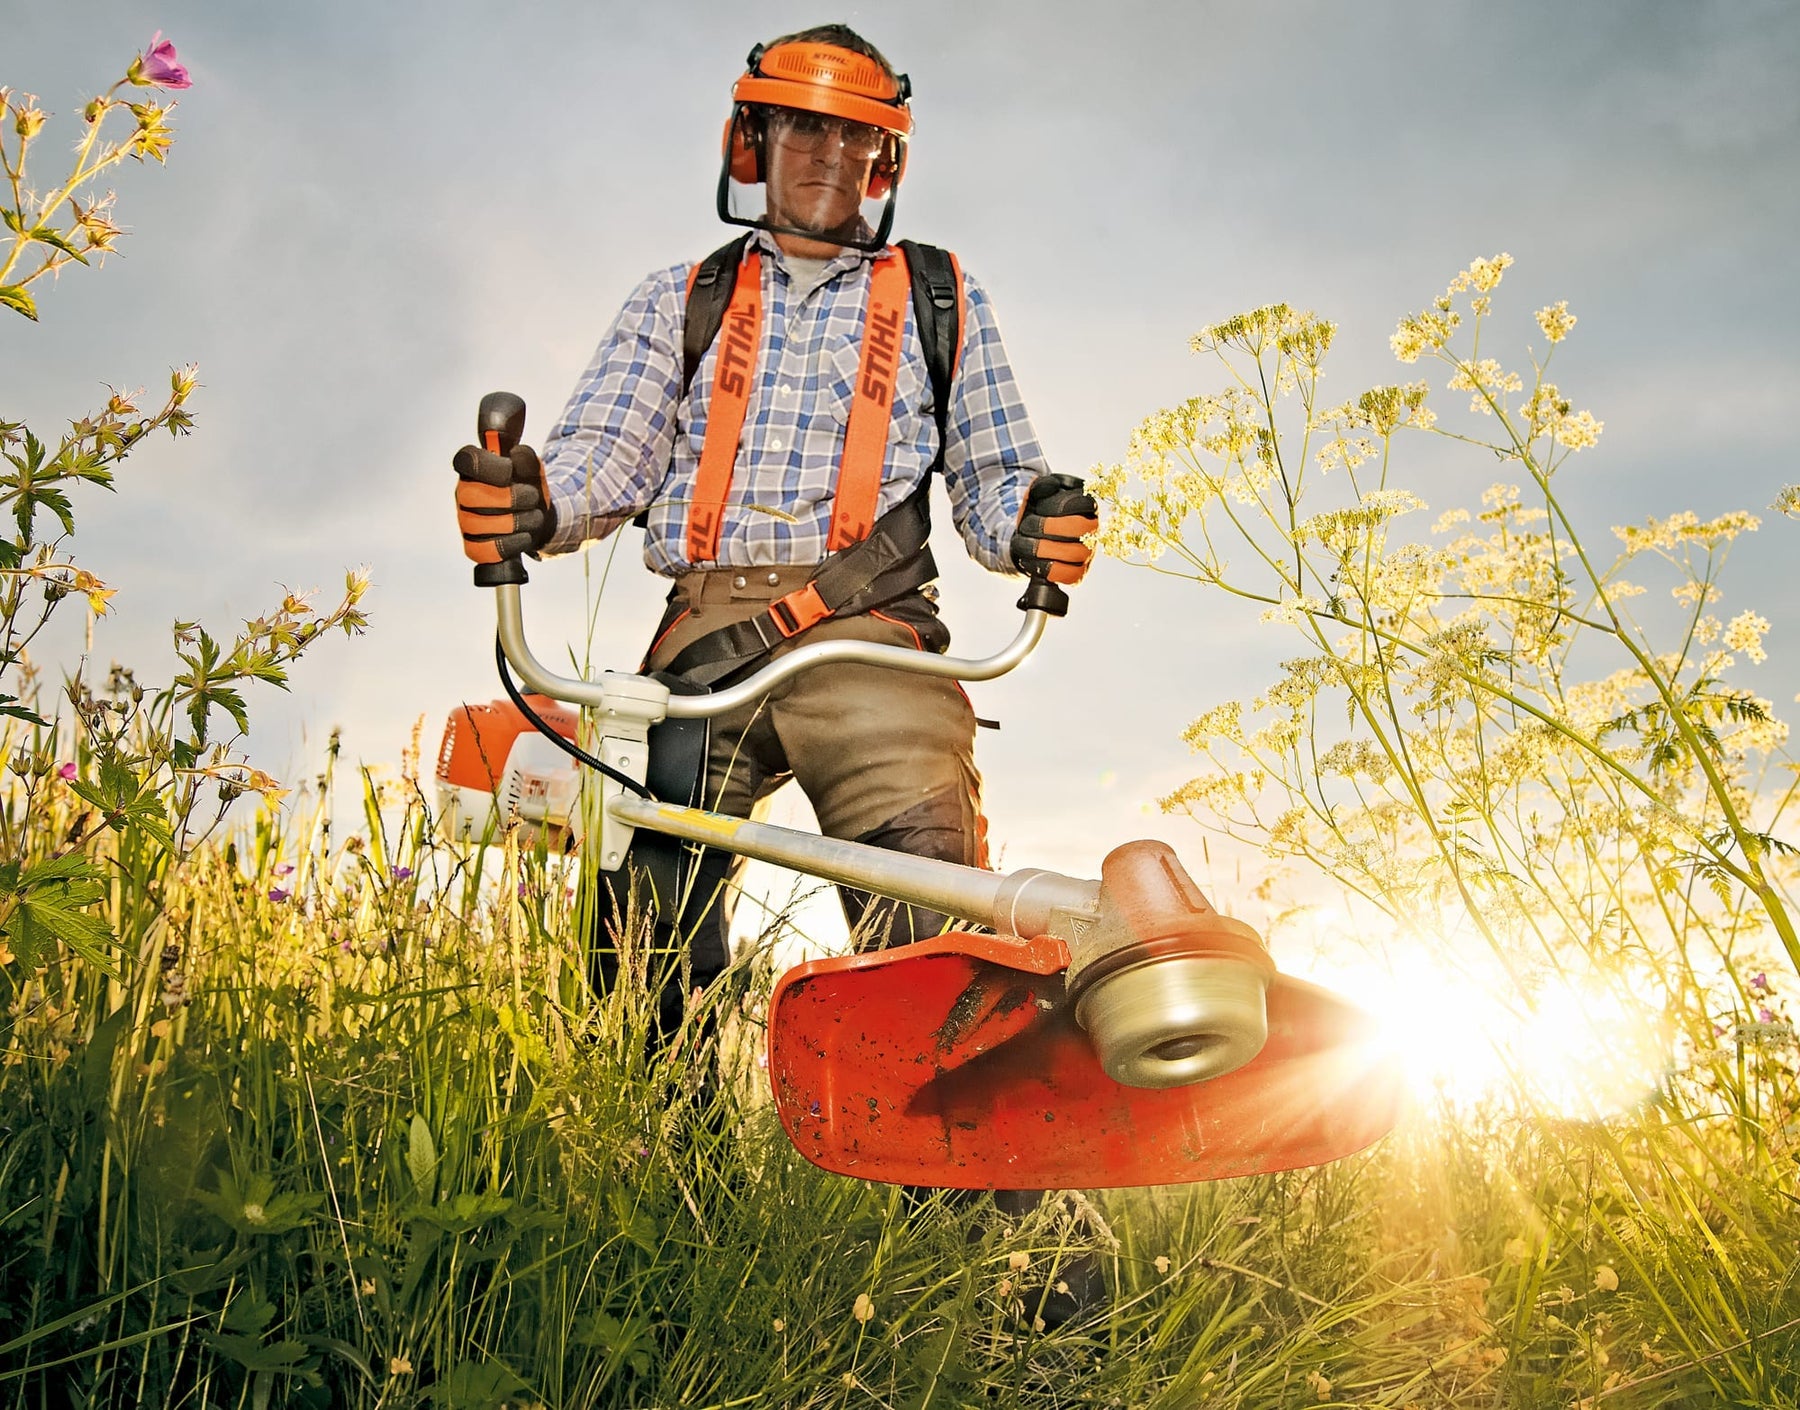 Man using Stihl heavy duty petrol brush cutter to cut weeds in the hot sun. High quality image looks very attractive